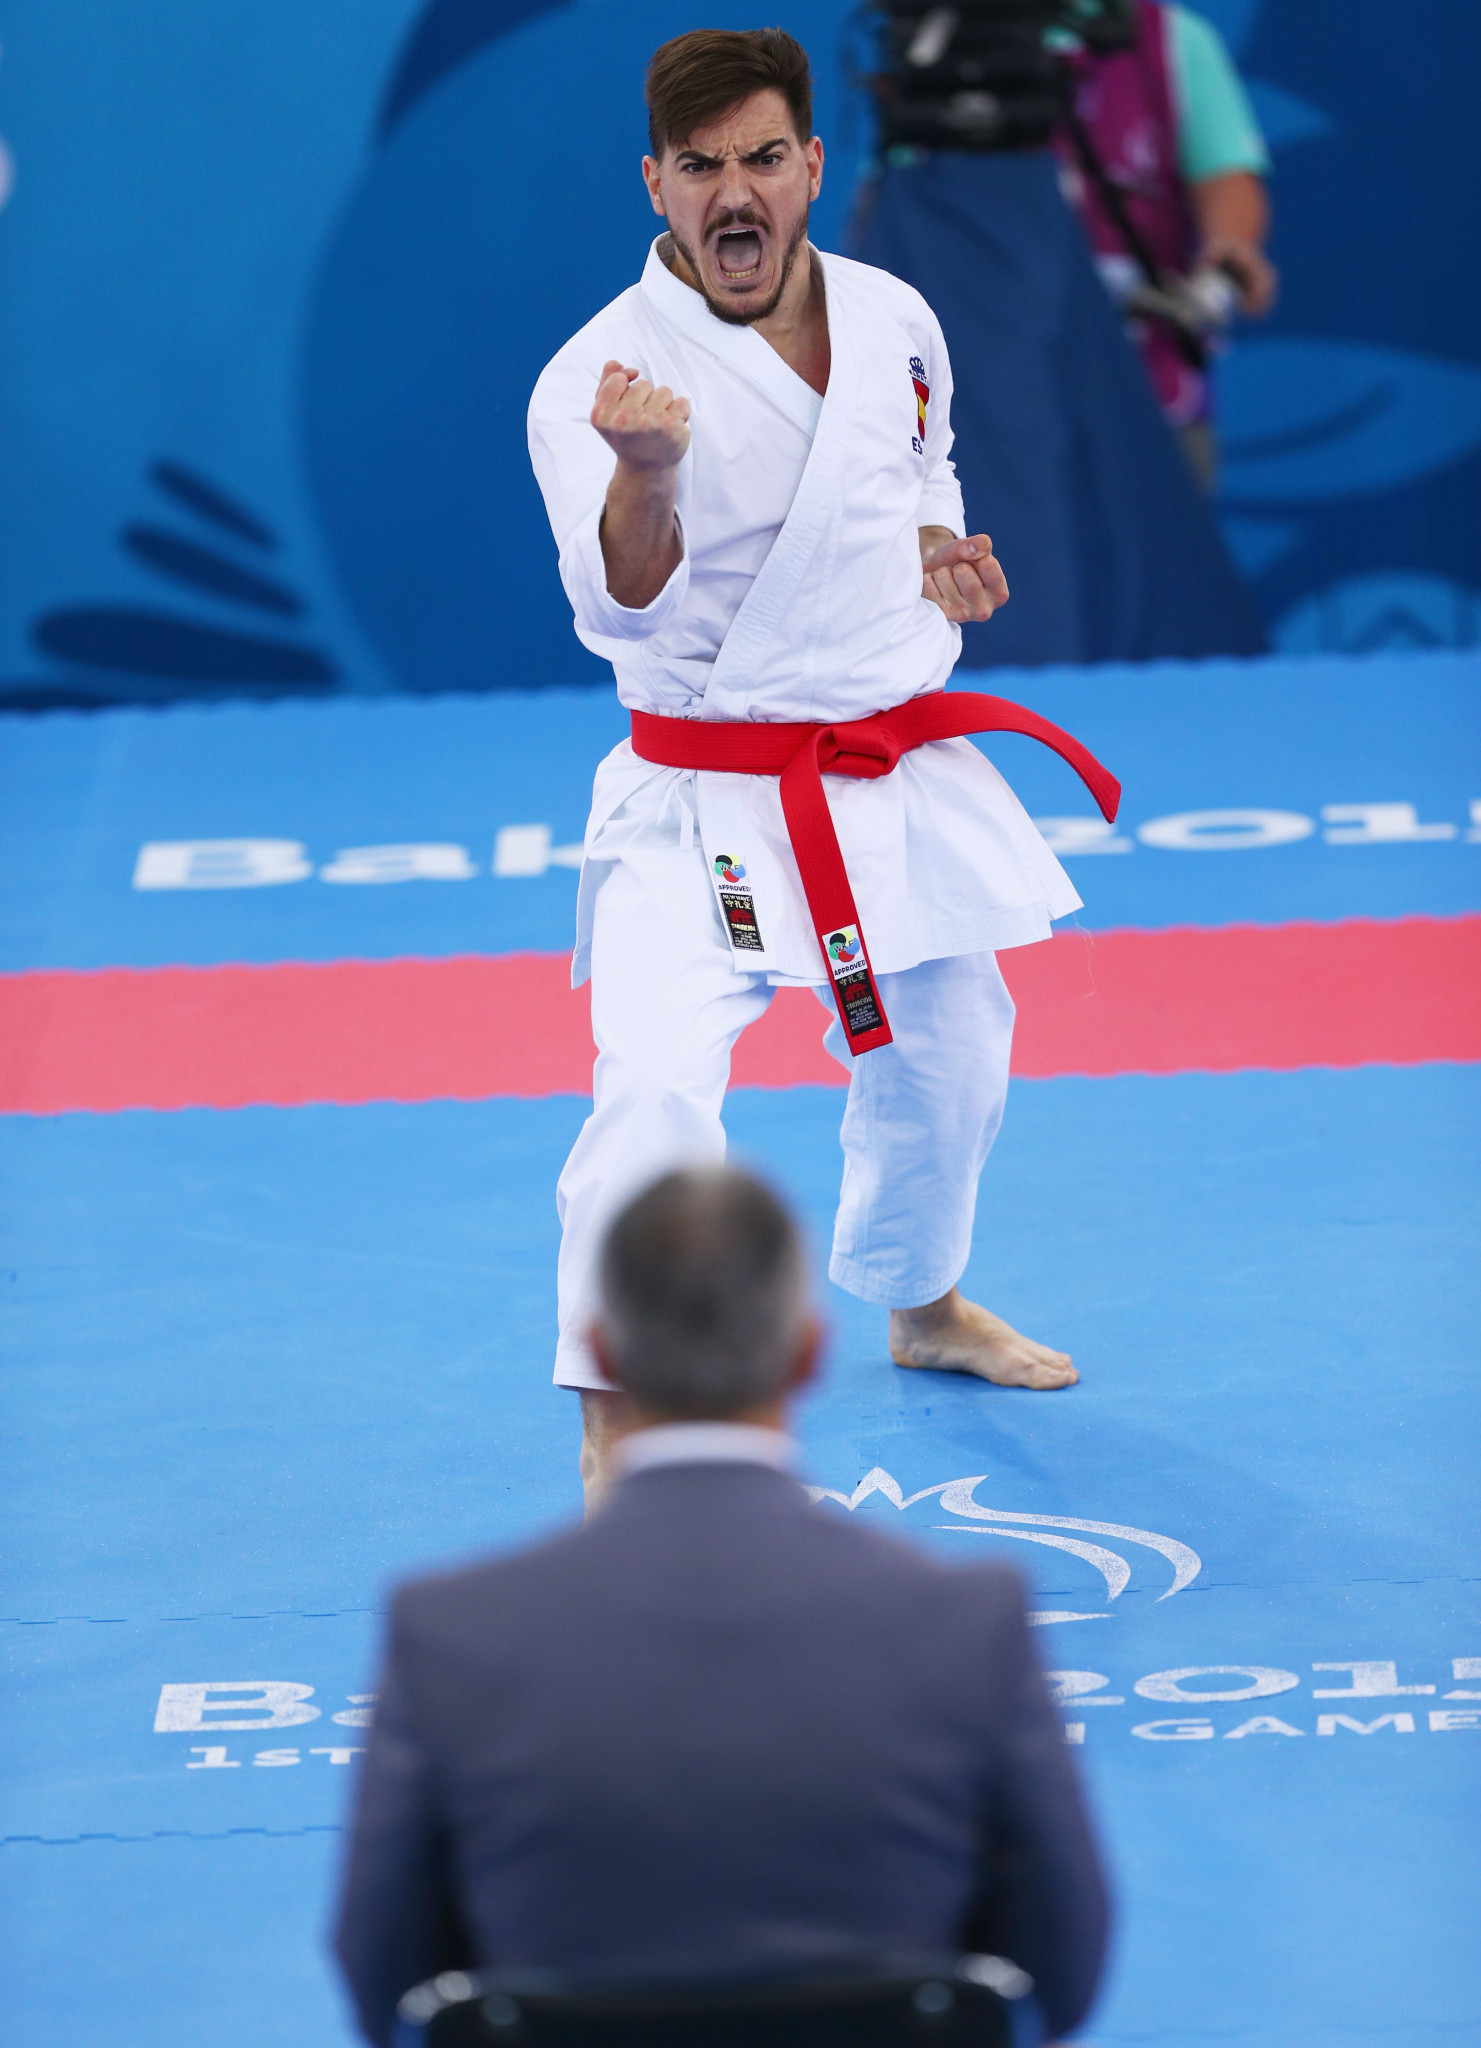 Damian Quintero will lead the home Spanish charge in kata competition ©Getty Images